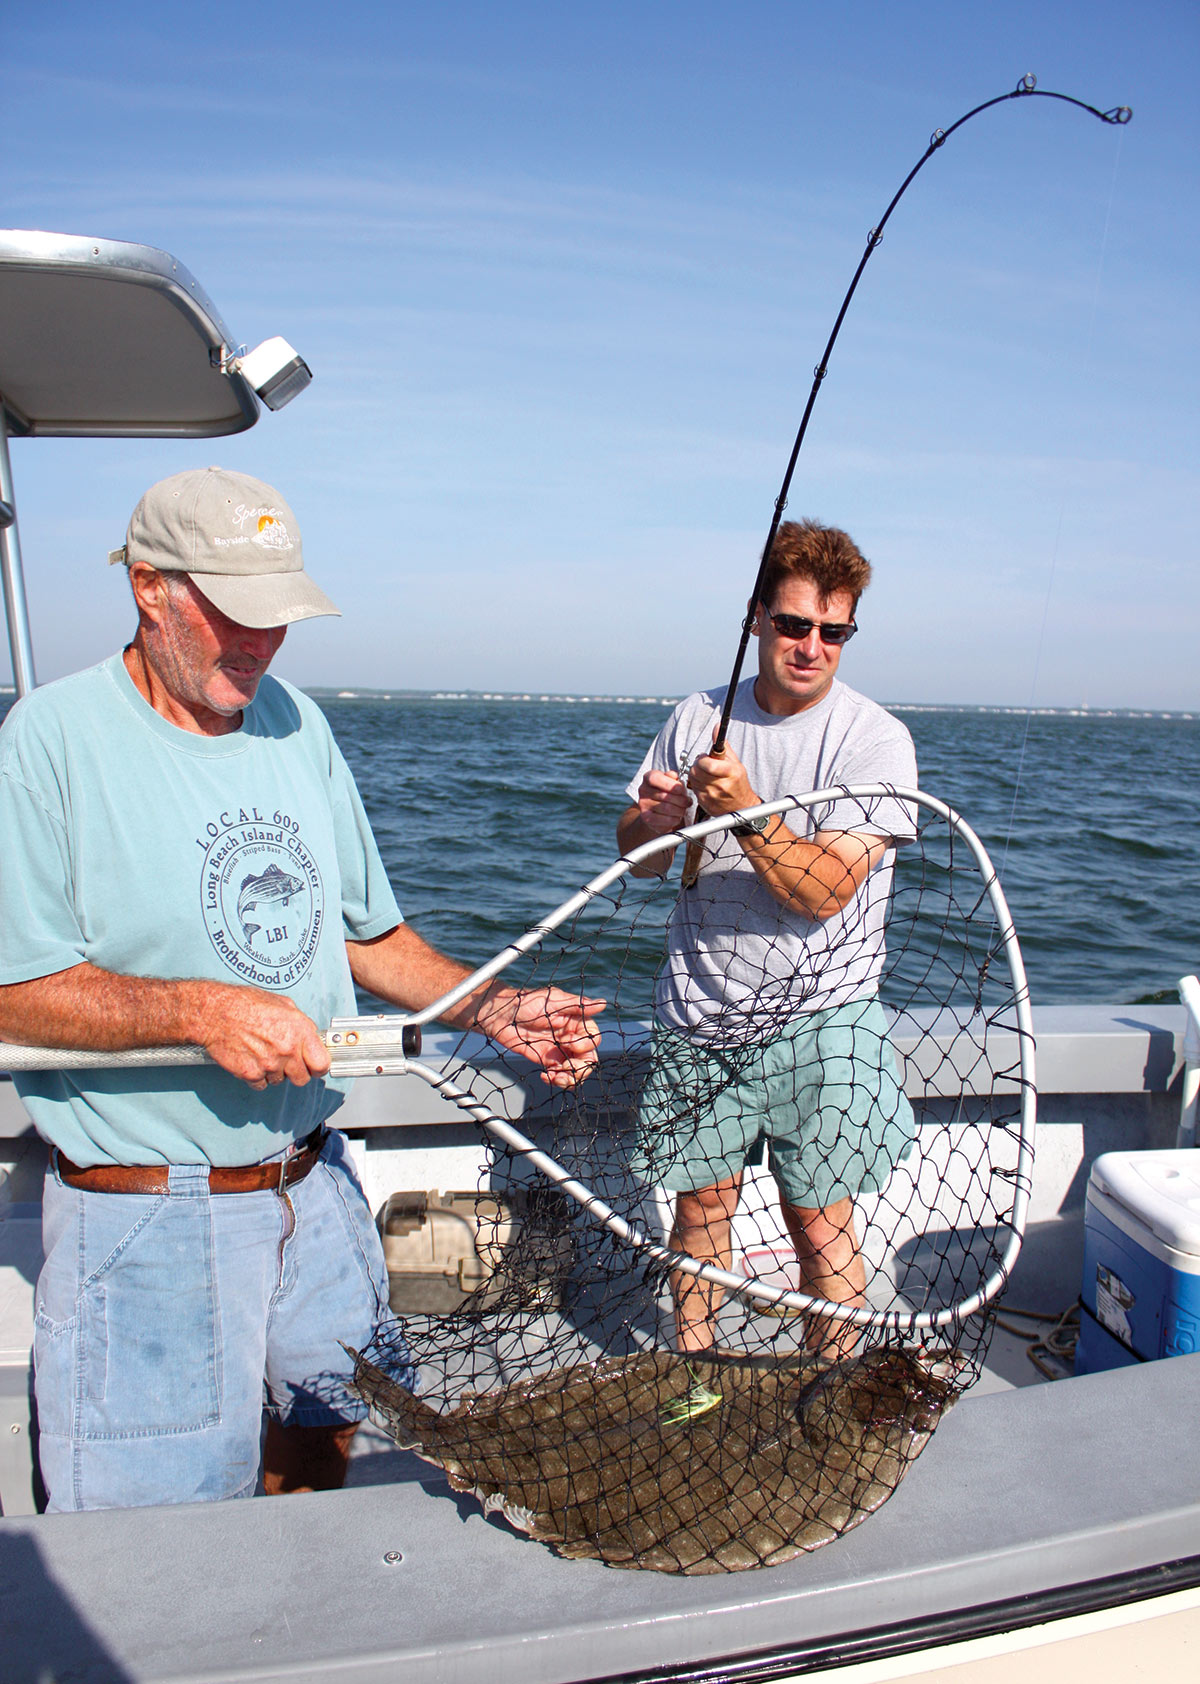 Two men on a boat with a fishing rod and net catching a fluke fish